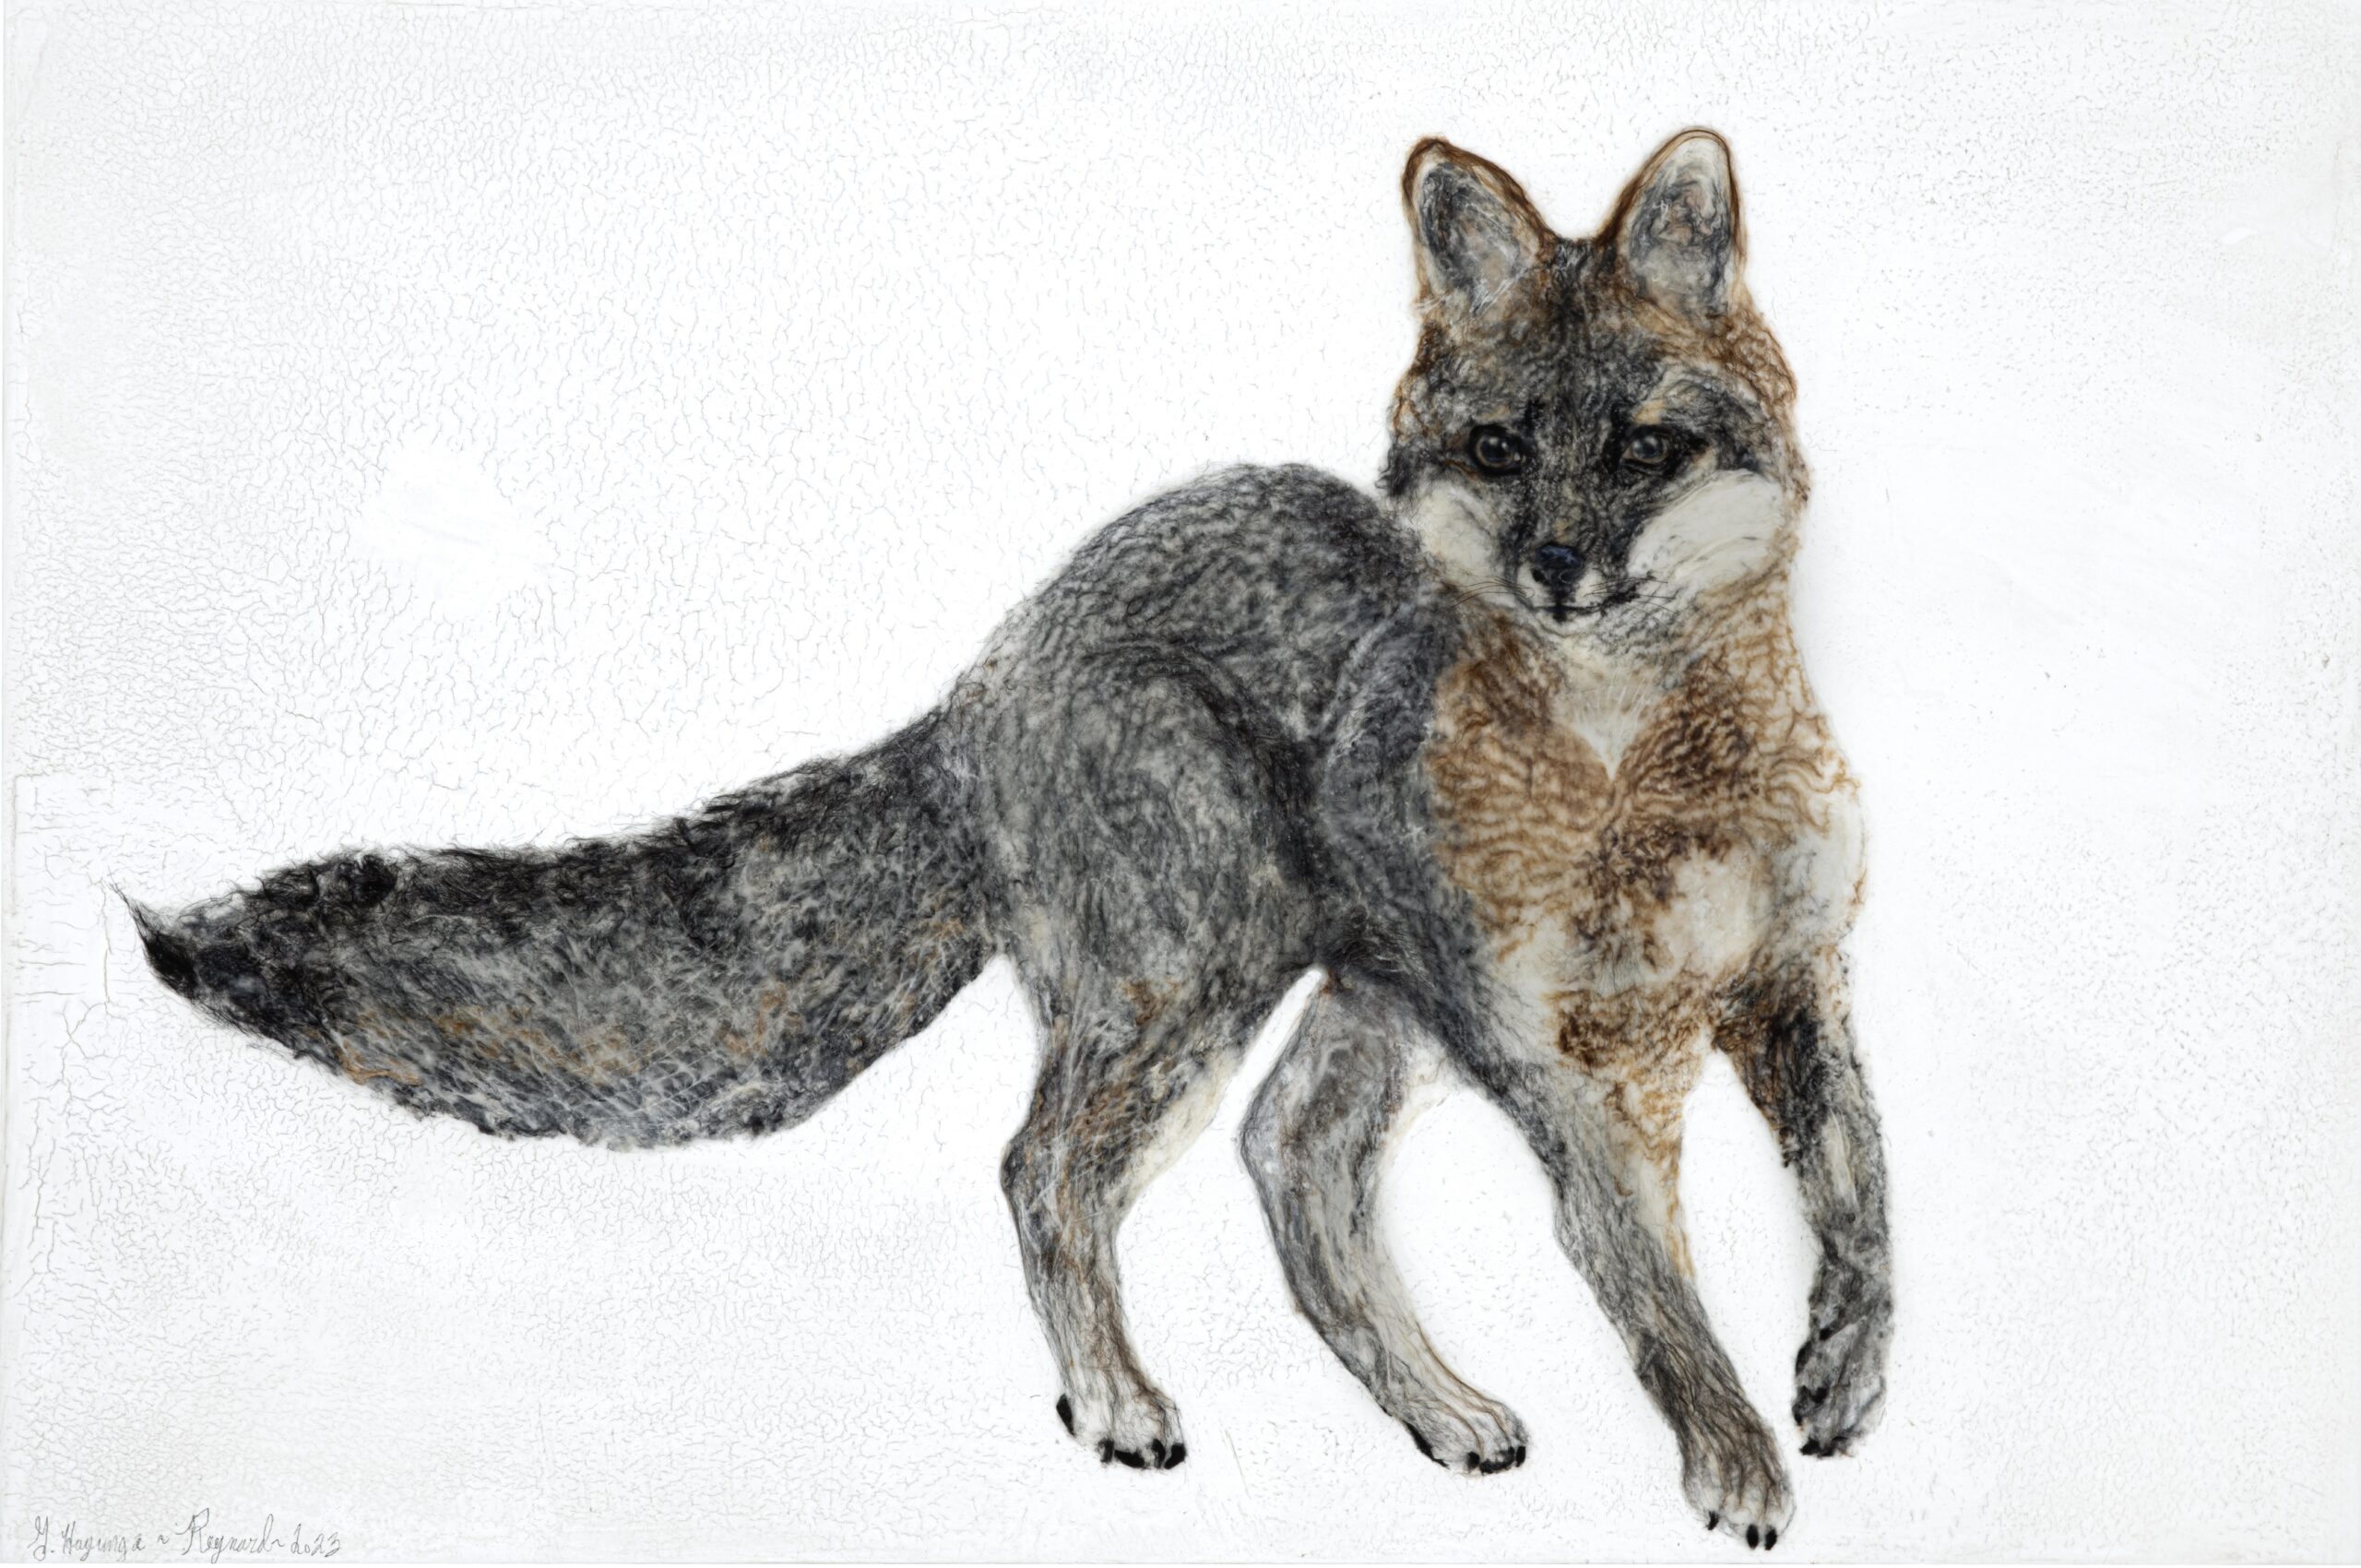 A gray and brown fox standing on top of snow covered ground.